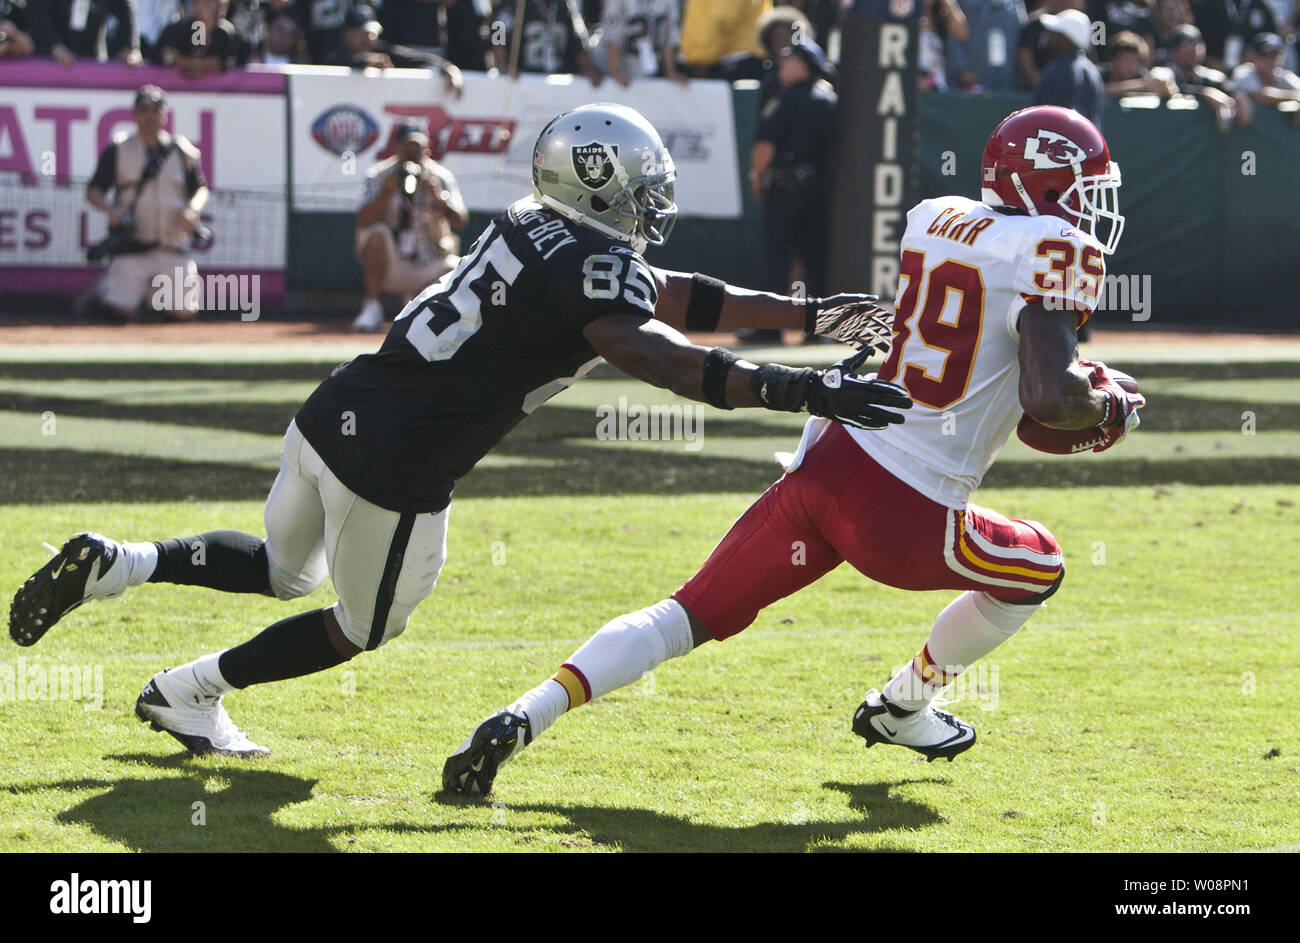 Oakland Raiders WR Darrius Hayward-Bey (85) tries to tackle Kansas City Chiefs Brandon Carr (39) after Carr intercepted a Kyle Boller pass  in the second quarter at the O.co Coliseum in Oakland, California on October 23, 2011. The Raiders threw six interceptions in the 28-0 loss to the Chiefs.   UPI/Terry Schmitt Stock Photo